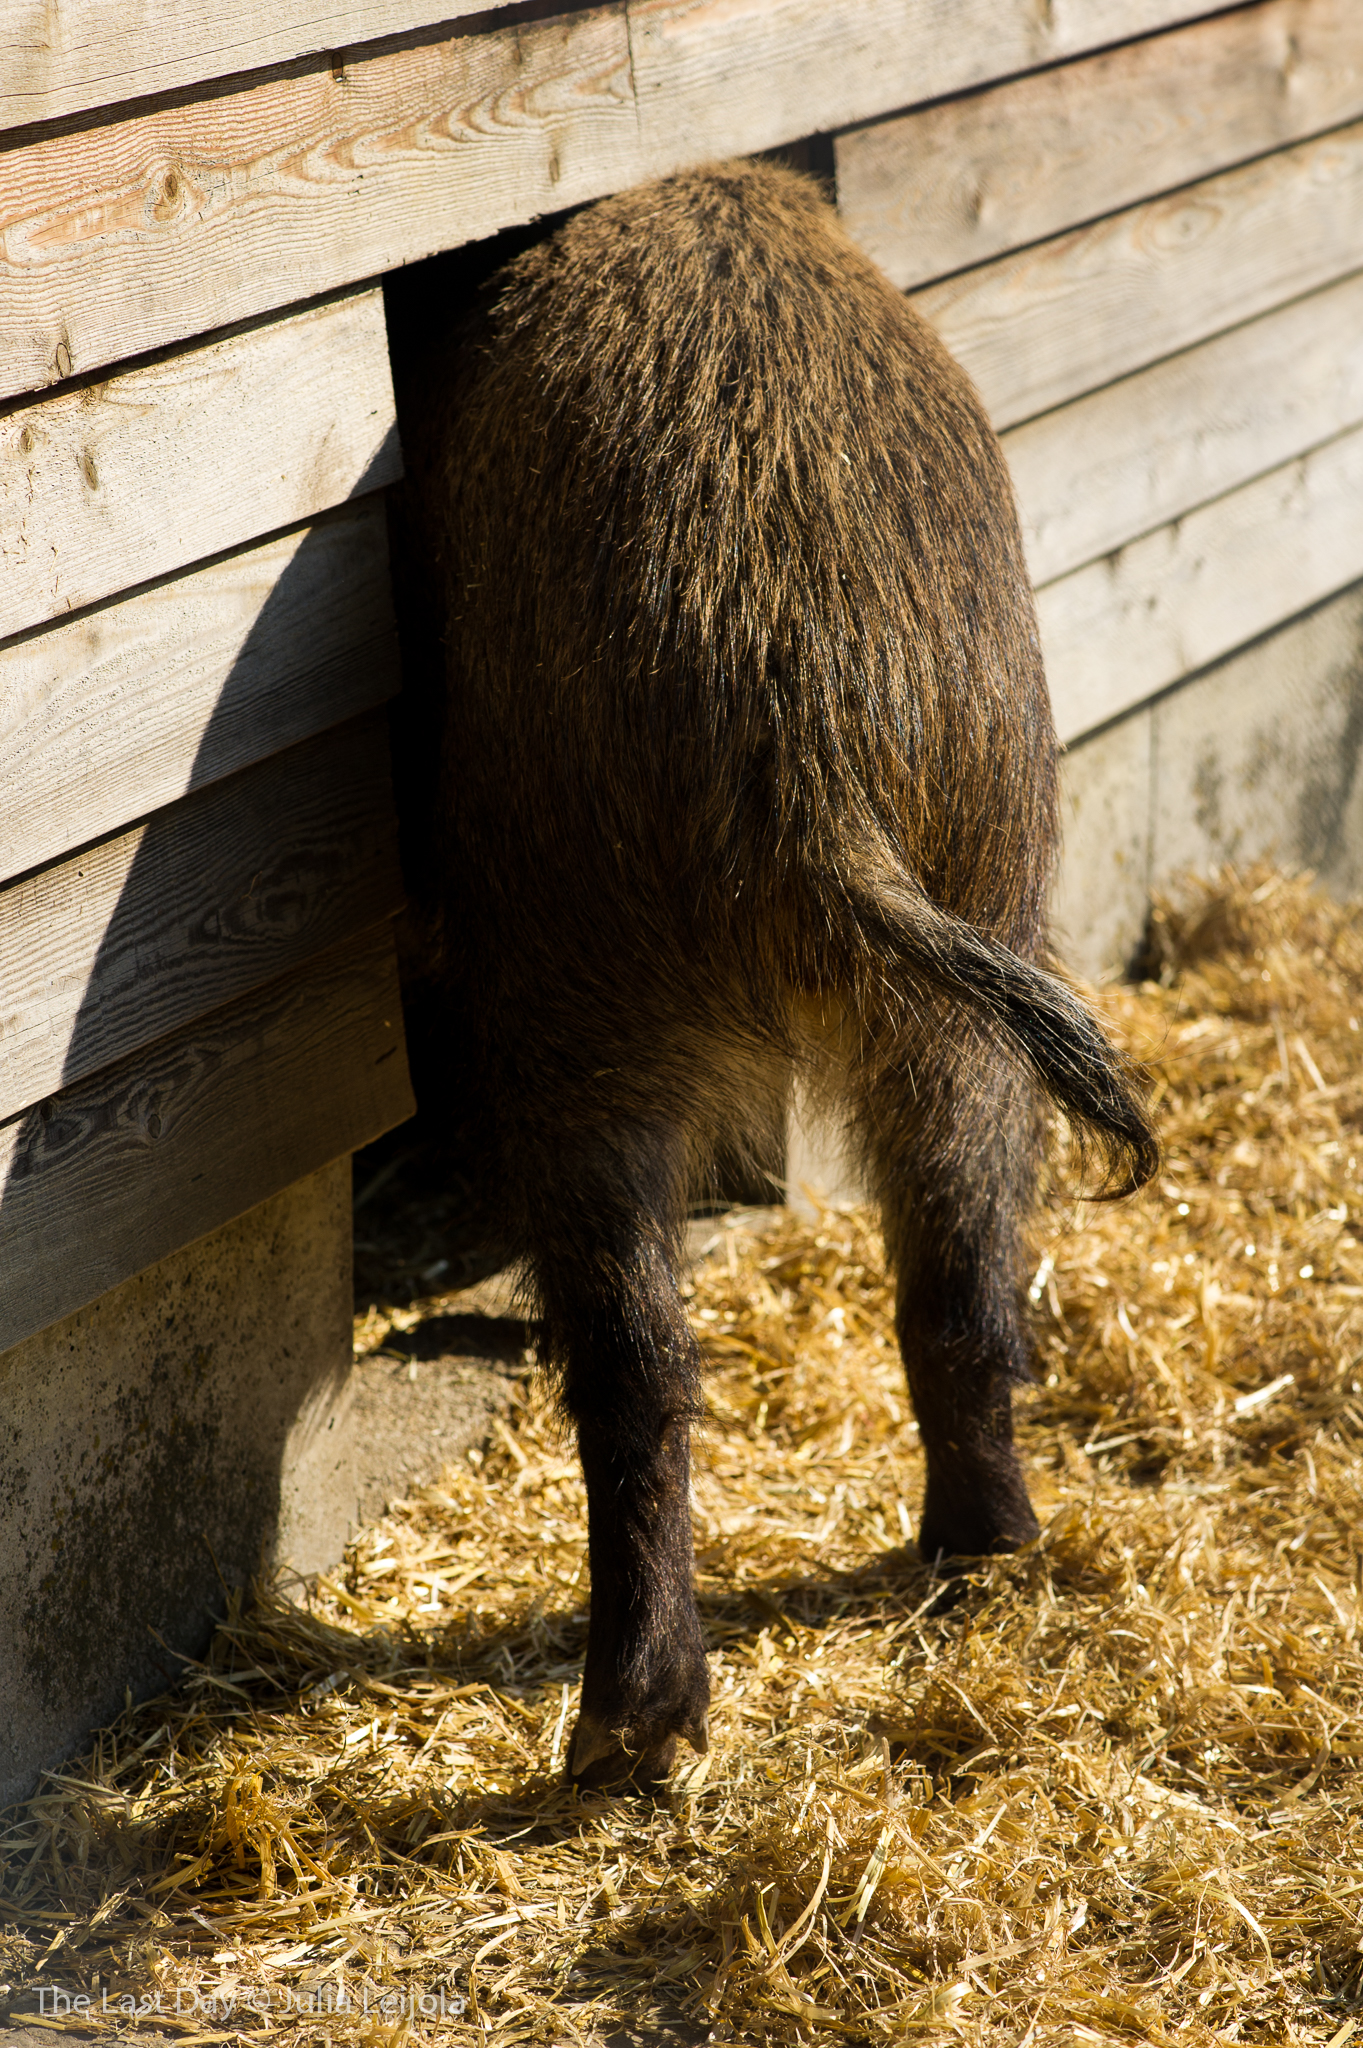 The behind of a Sus scrofa is sticking out of a wooden hut.